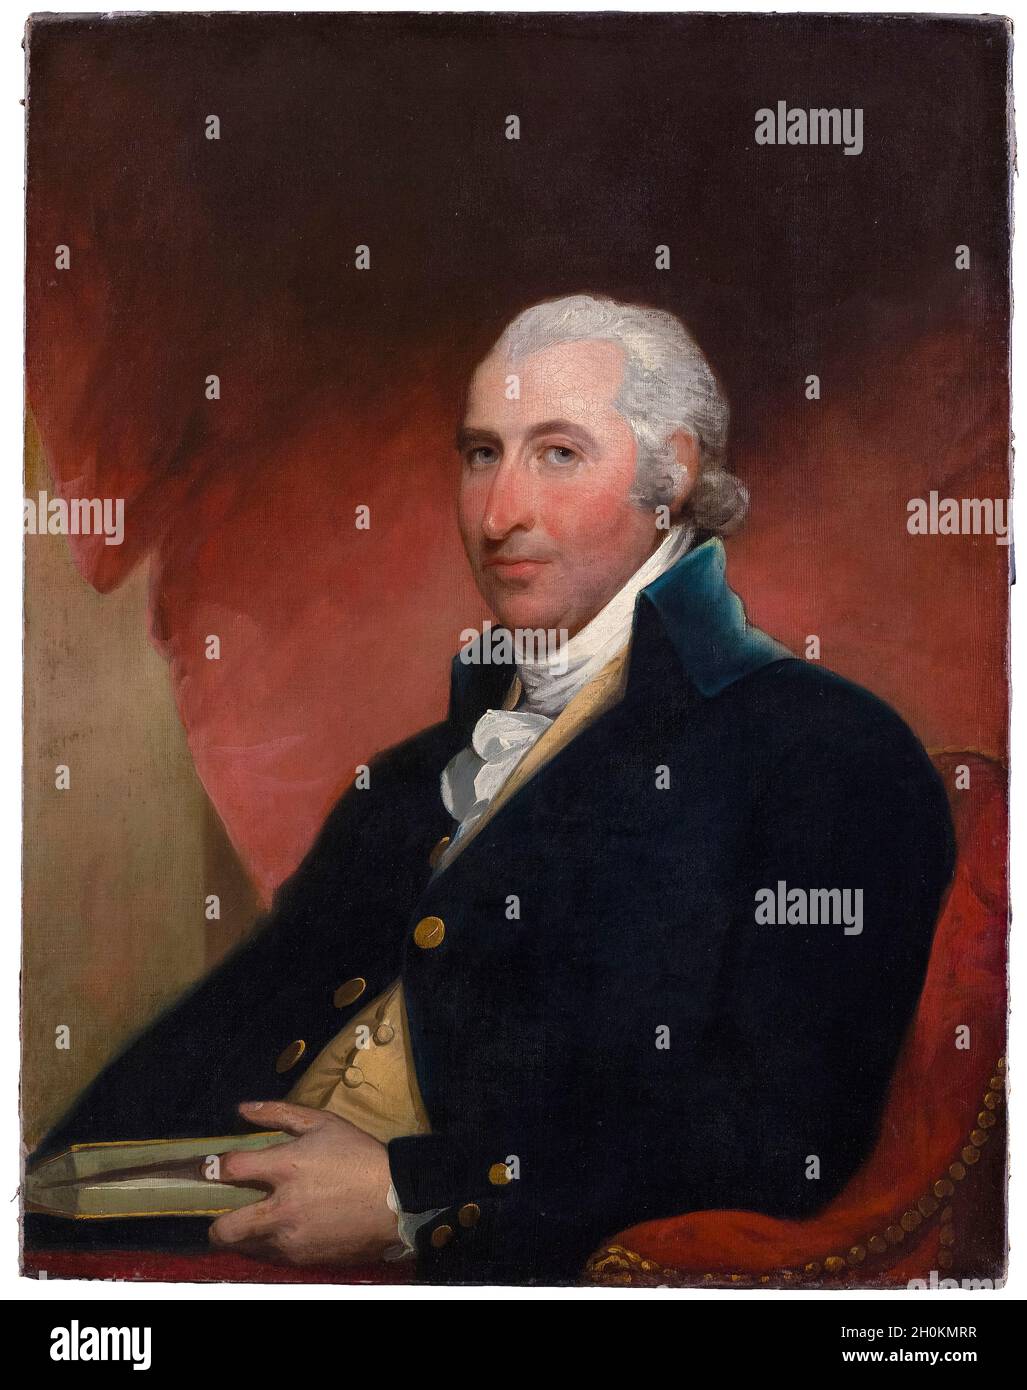 Captain John Shaw (1773-1823), Irish-born American officer in the United States Navy, portrait painting by Gilbert Stuart, 1793 Stock Photo